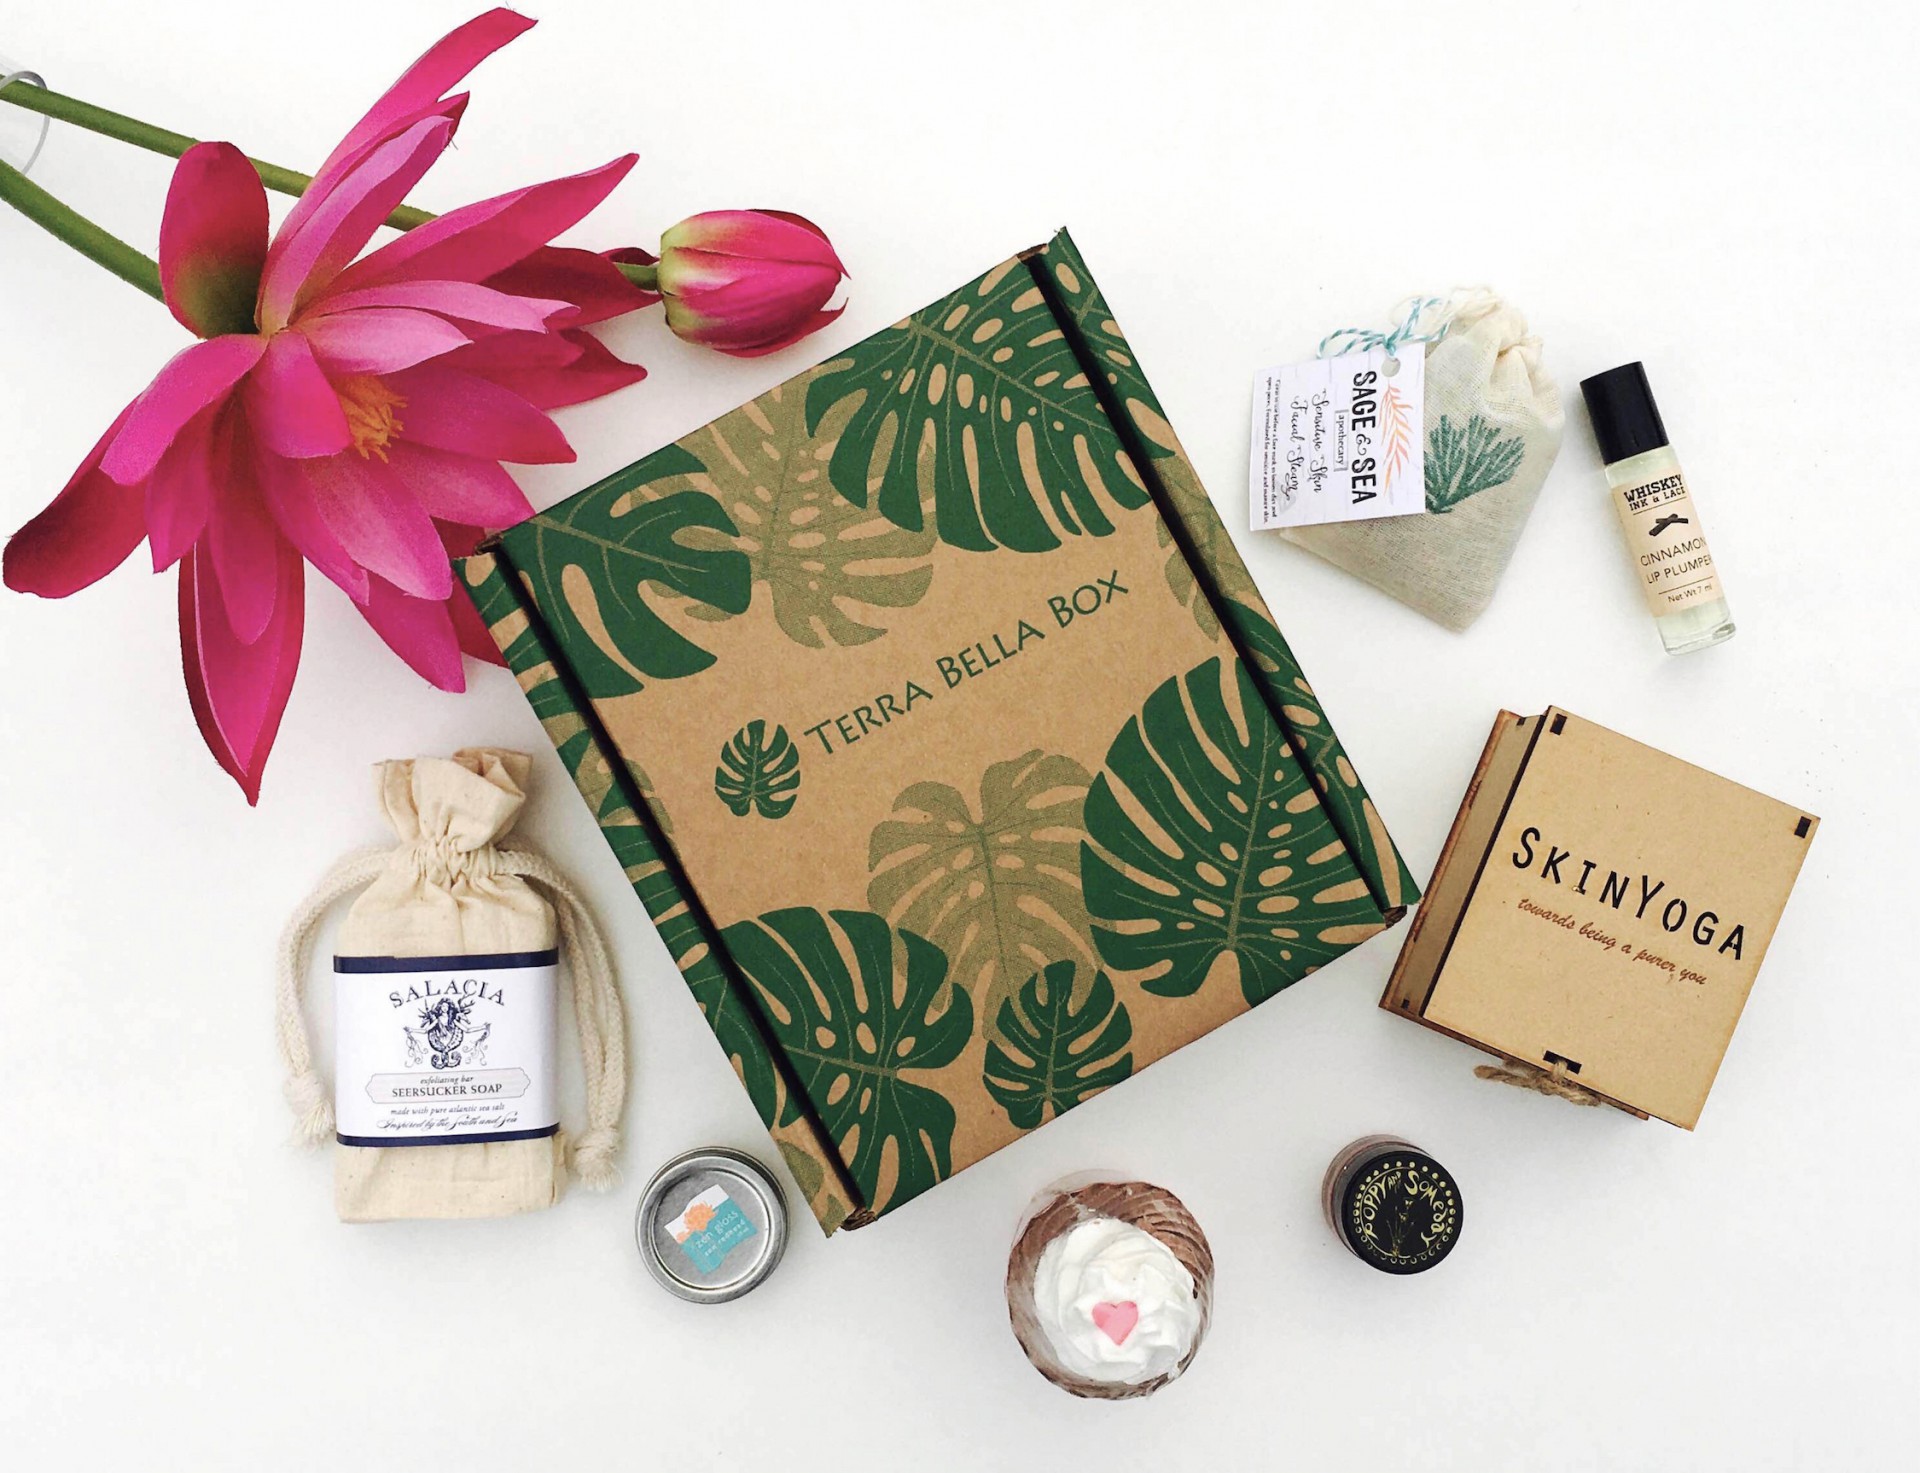  Awesome Subscription Boxes at Cratejoy